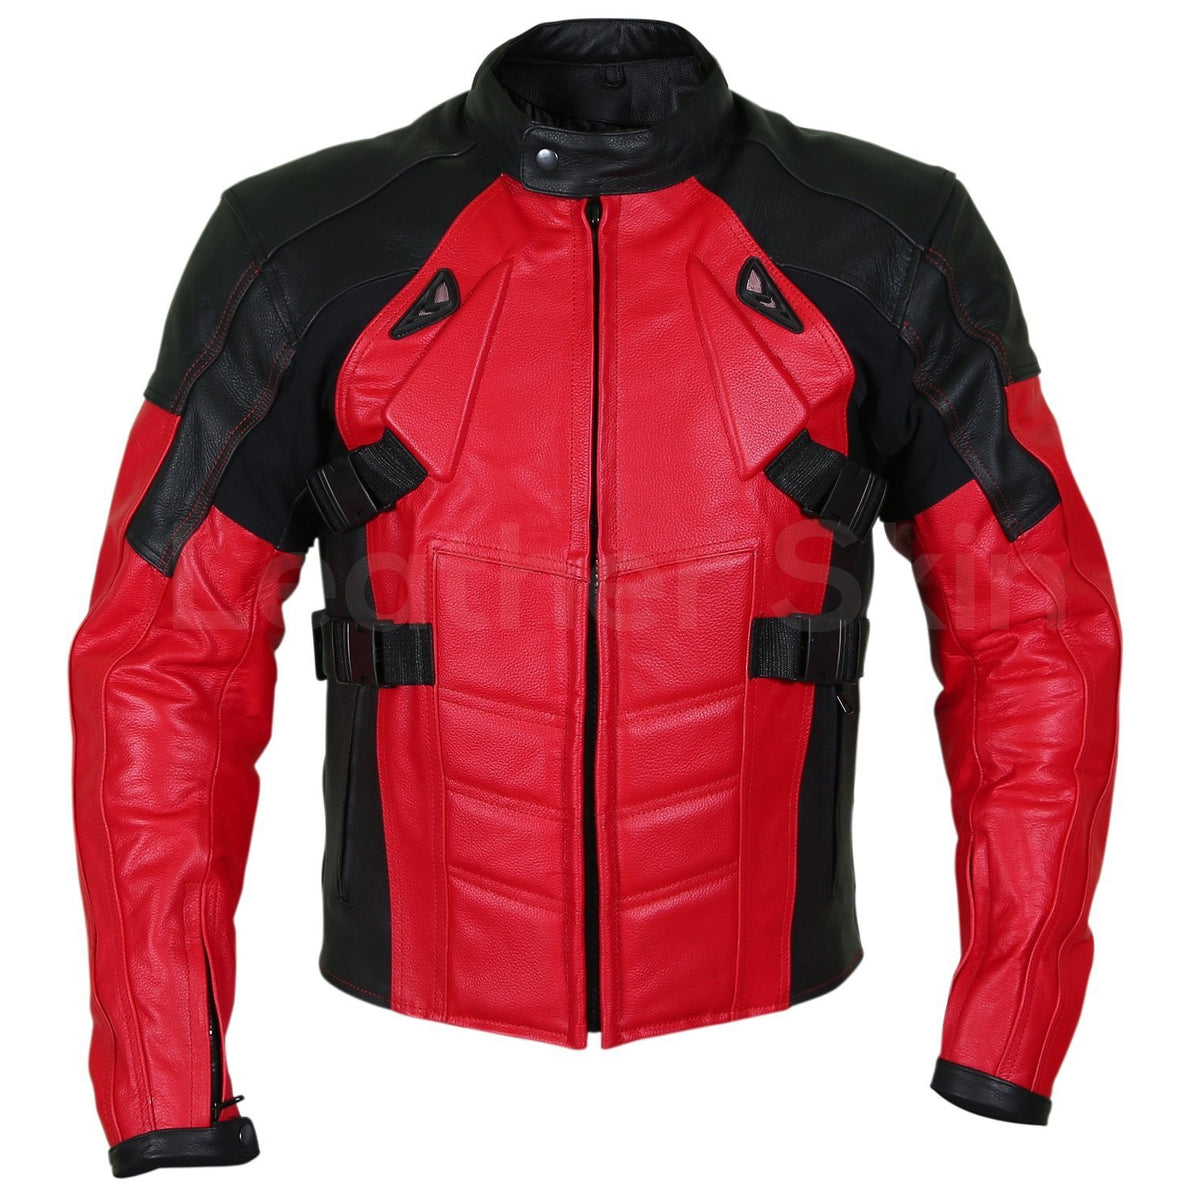 Men's Black and Red Leather Jacket for Bikers in Leather | Black leather  jacket men, Leather jacket, Classy outfits men